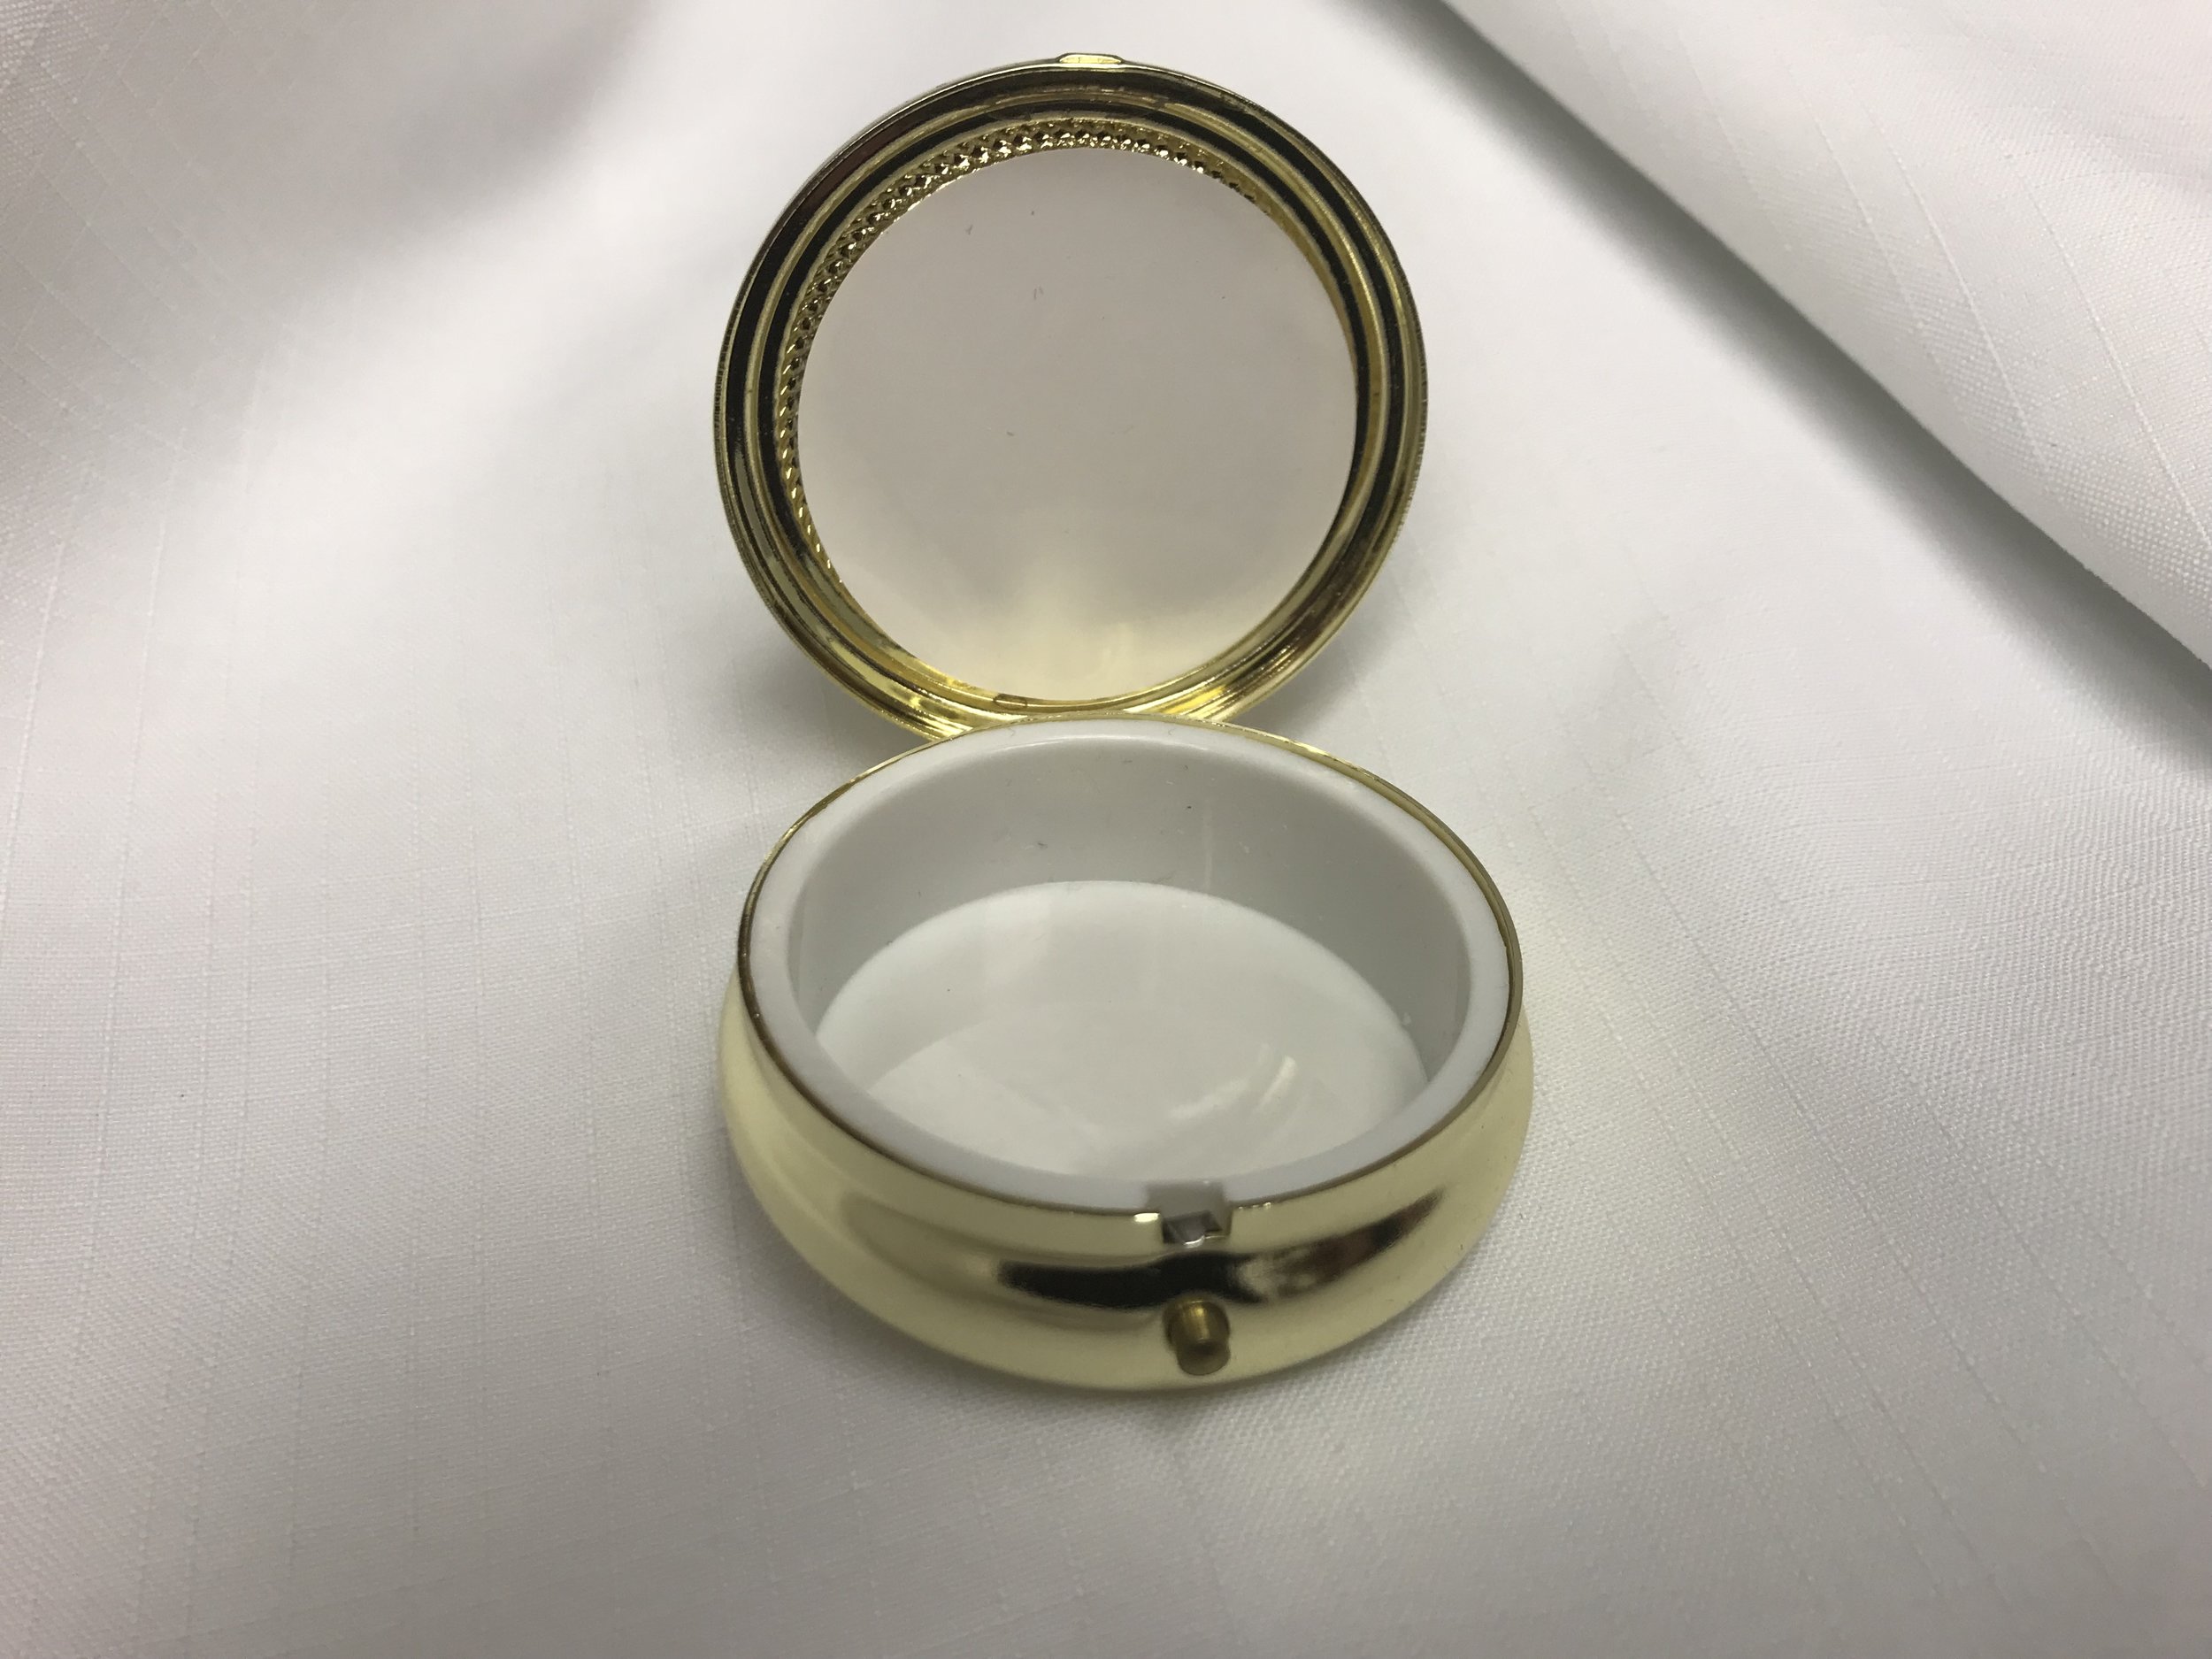 Pyx that holds the Eucharist